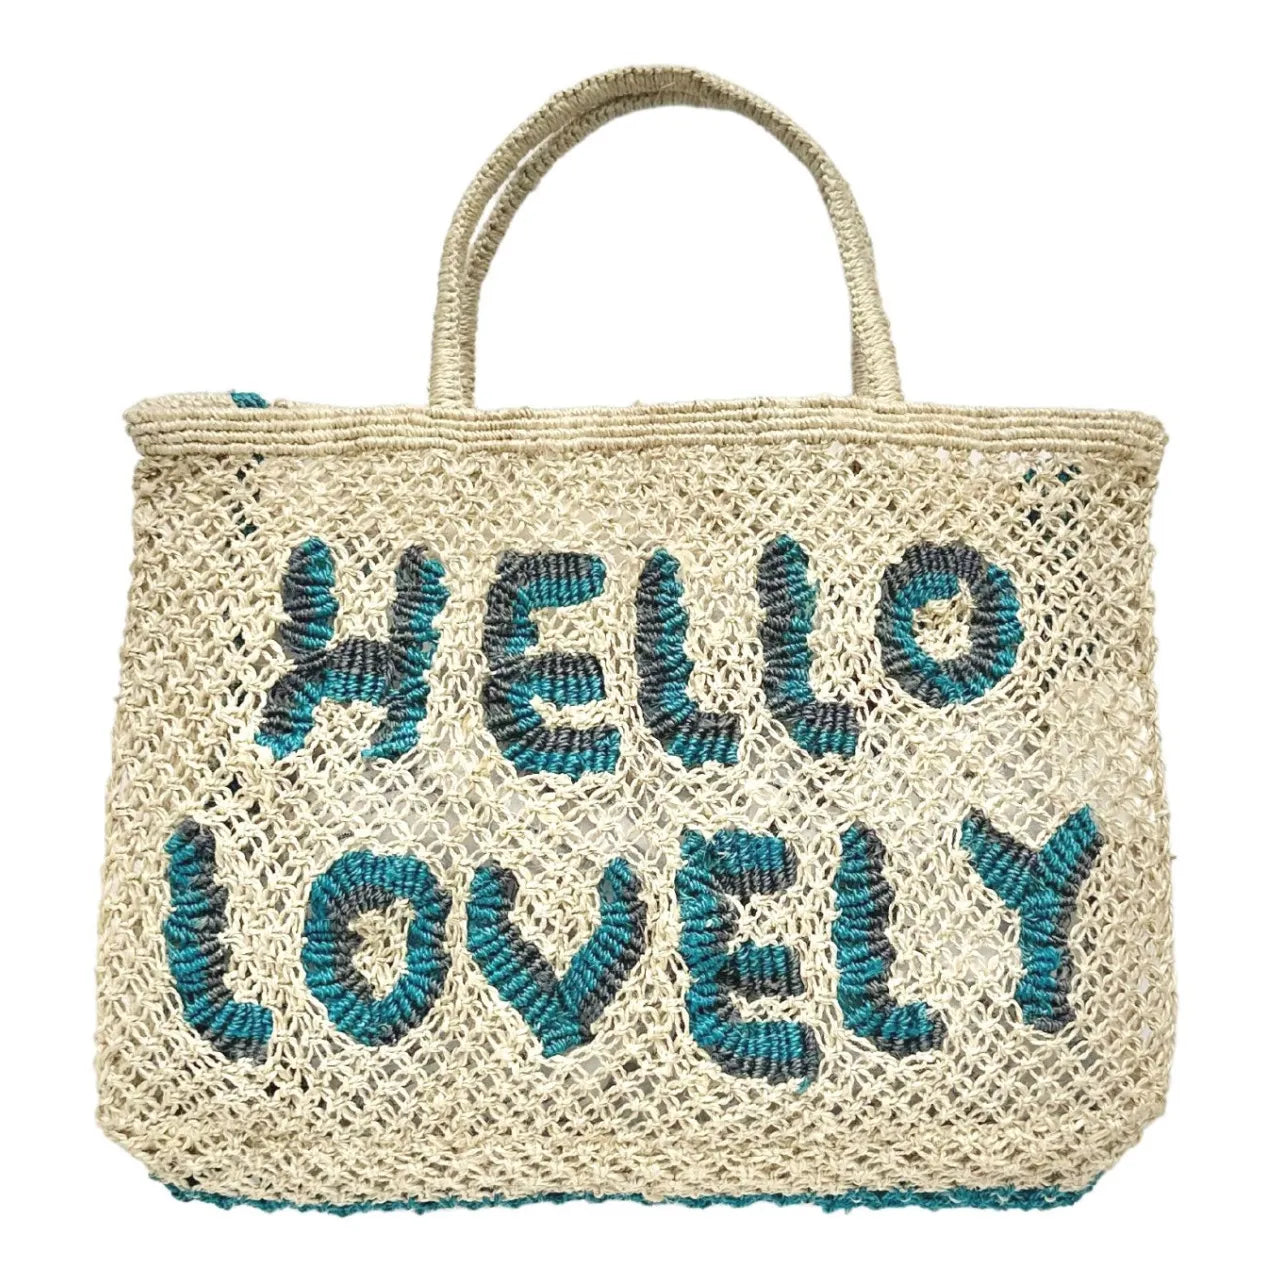 Hello Lovely Bag - Ocean and Pebble